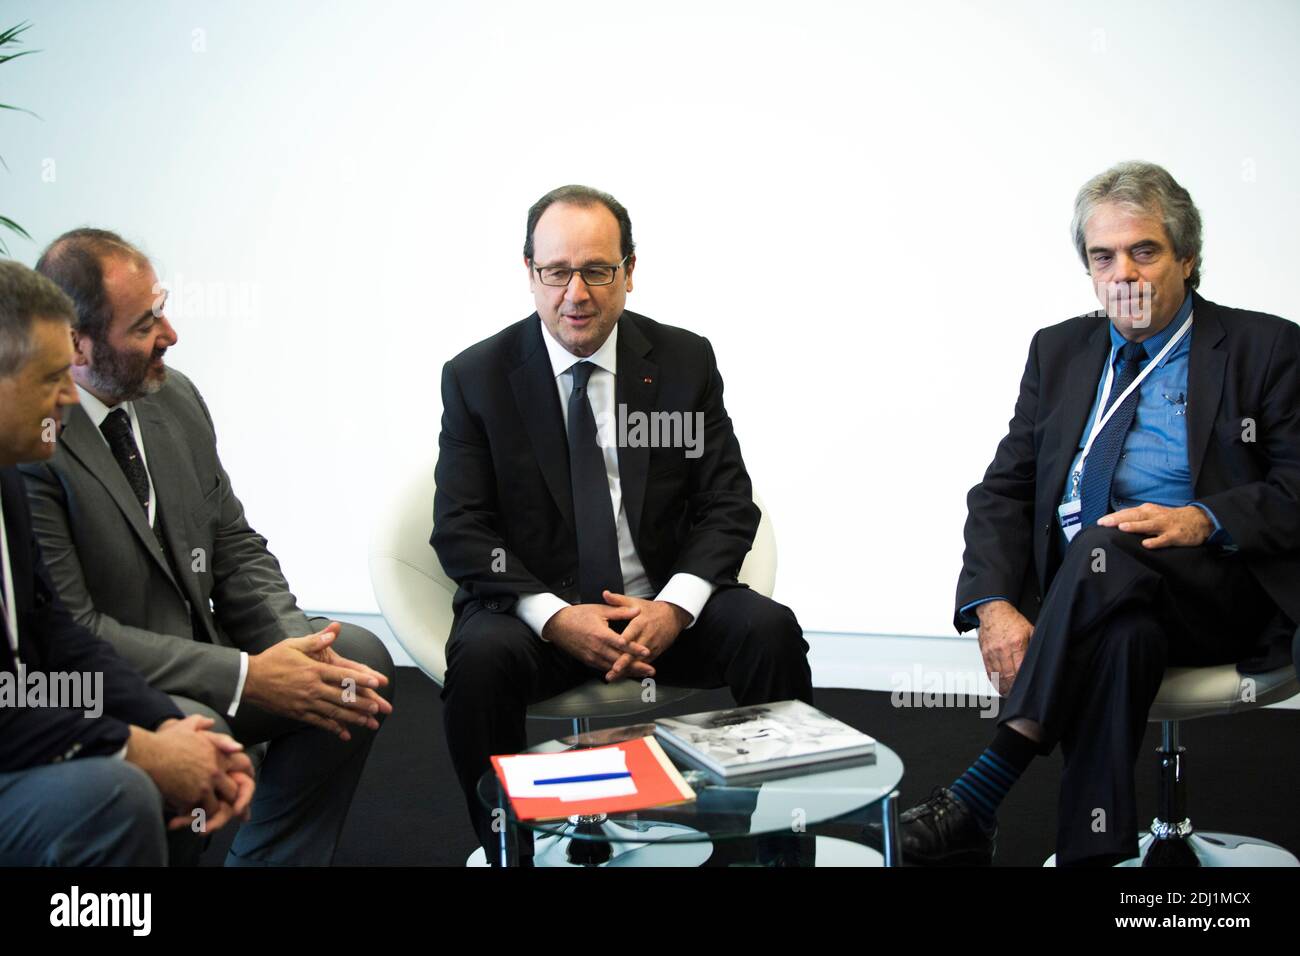 French President Francois Hollande during a round table meeting with  emergency physicists Prof. Pierre Carli, Dr. Francois Braun, Prof.  Pierre-Yves Gueugniaud, Prof. Bruno Riou and Dr. Patrick Pelloux during the  10th Emergency